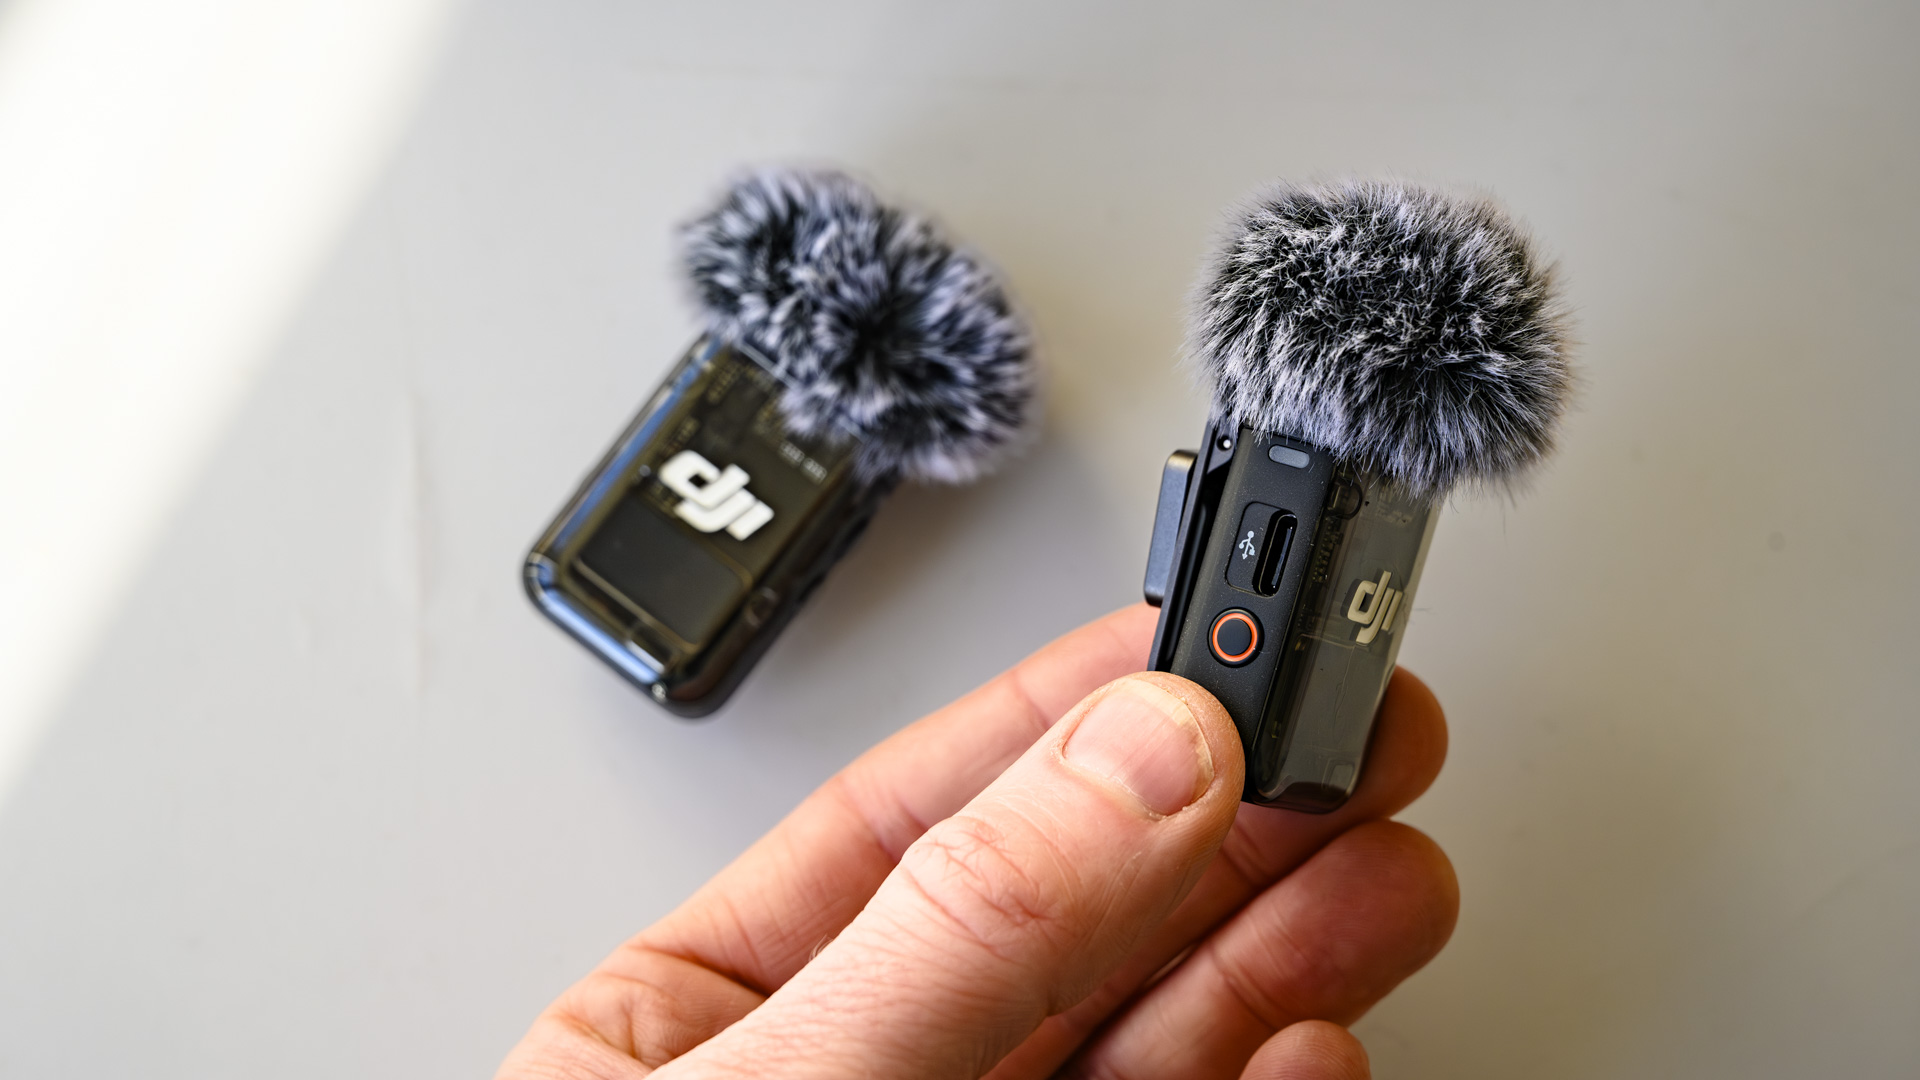 Profile of the DJI Mic 2 receiver in the hand